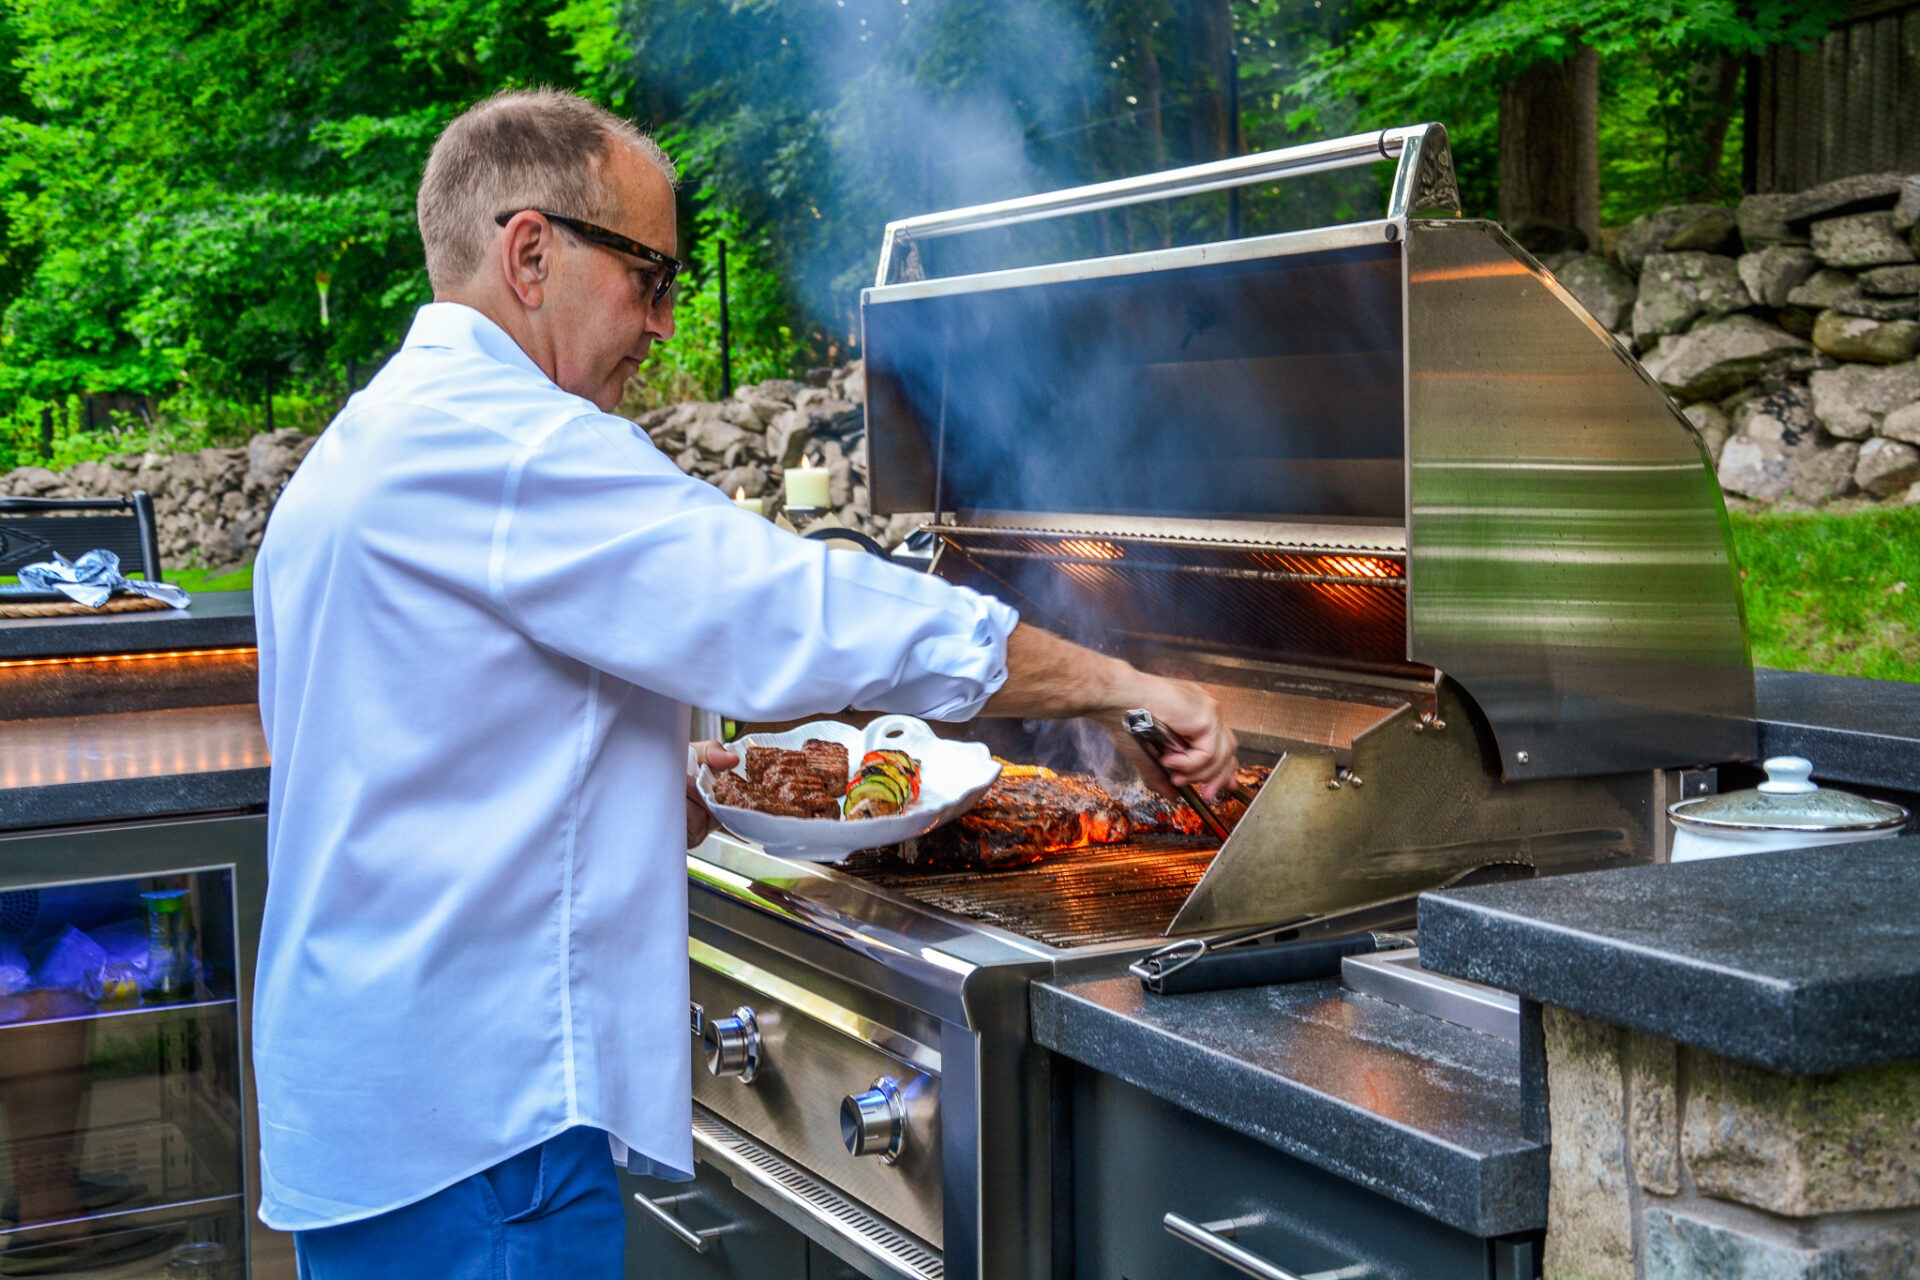 A person in a white shirt is grilling meat on an outdoor barbecue. The grill is smoking, and a platter is held in one hand.